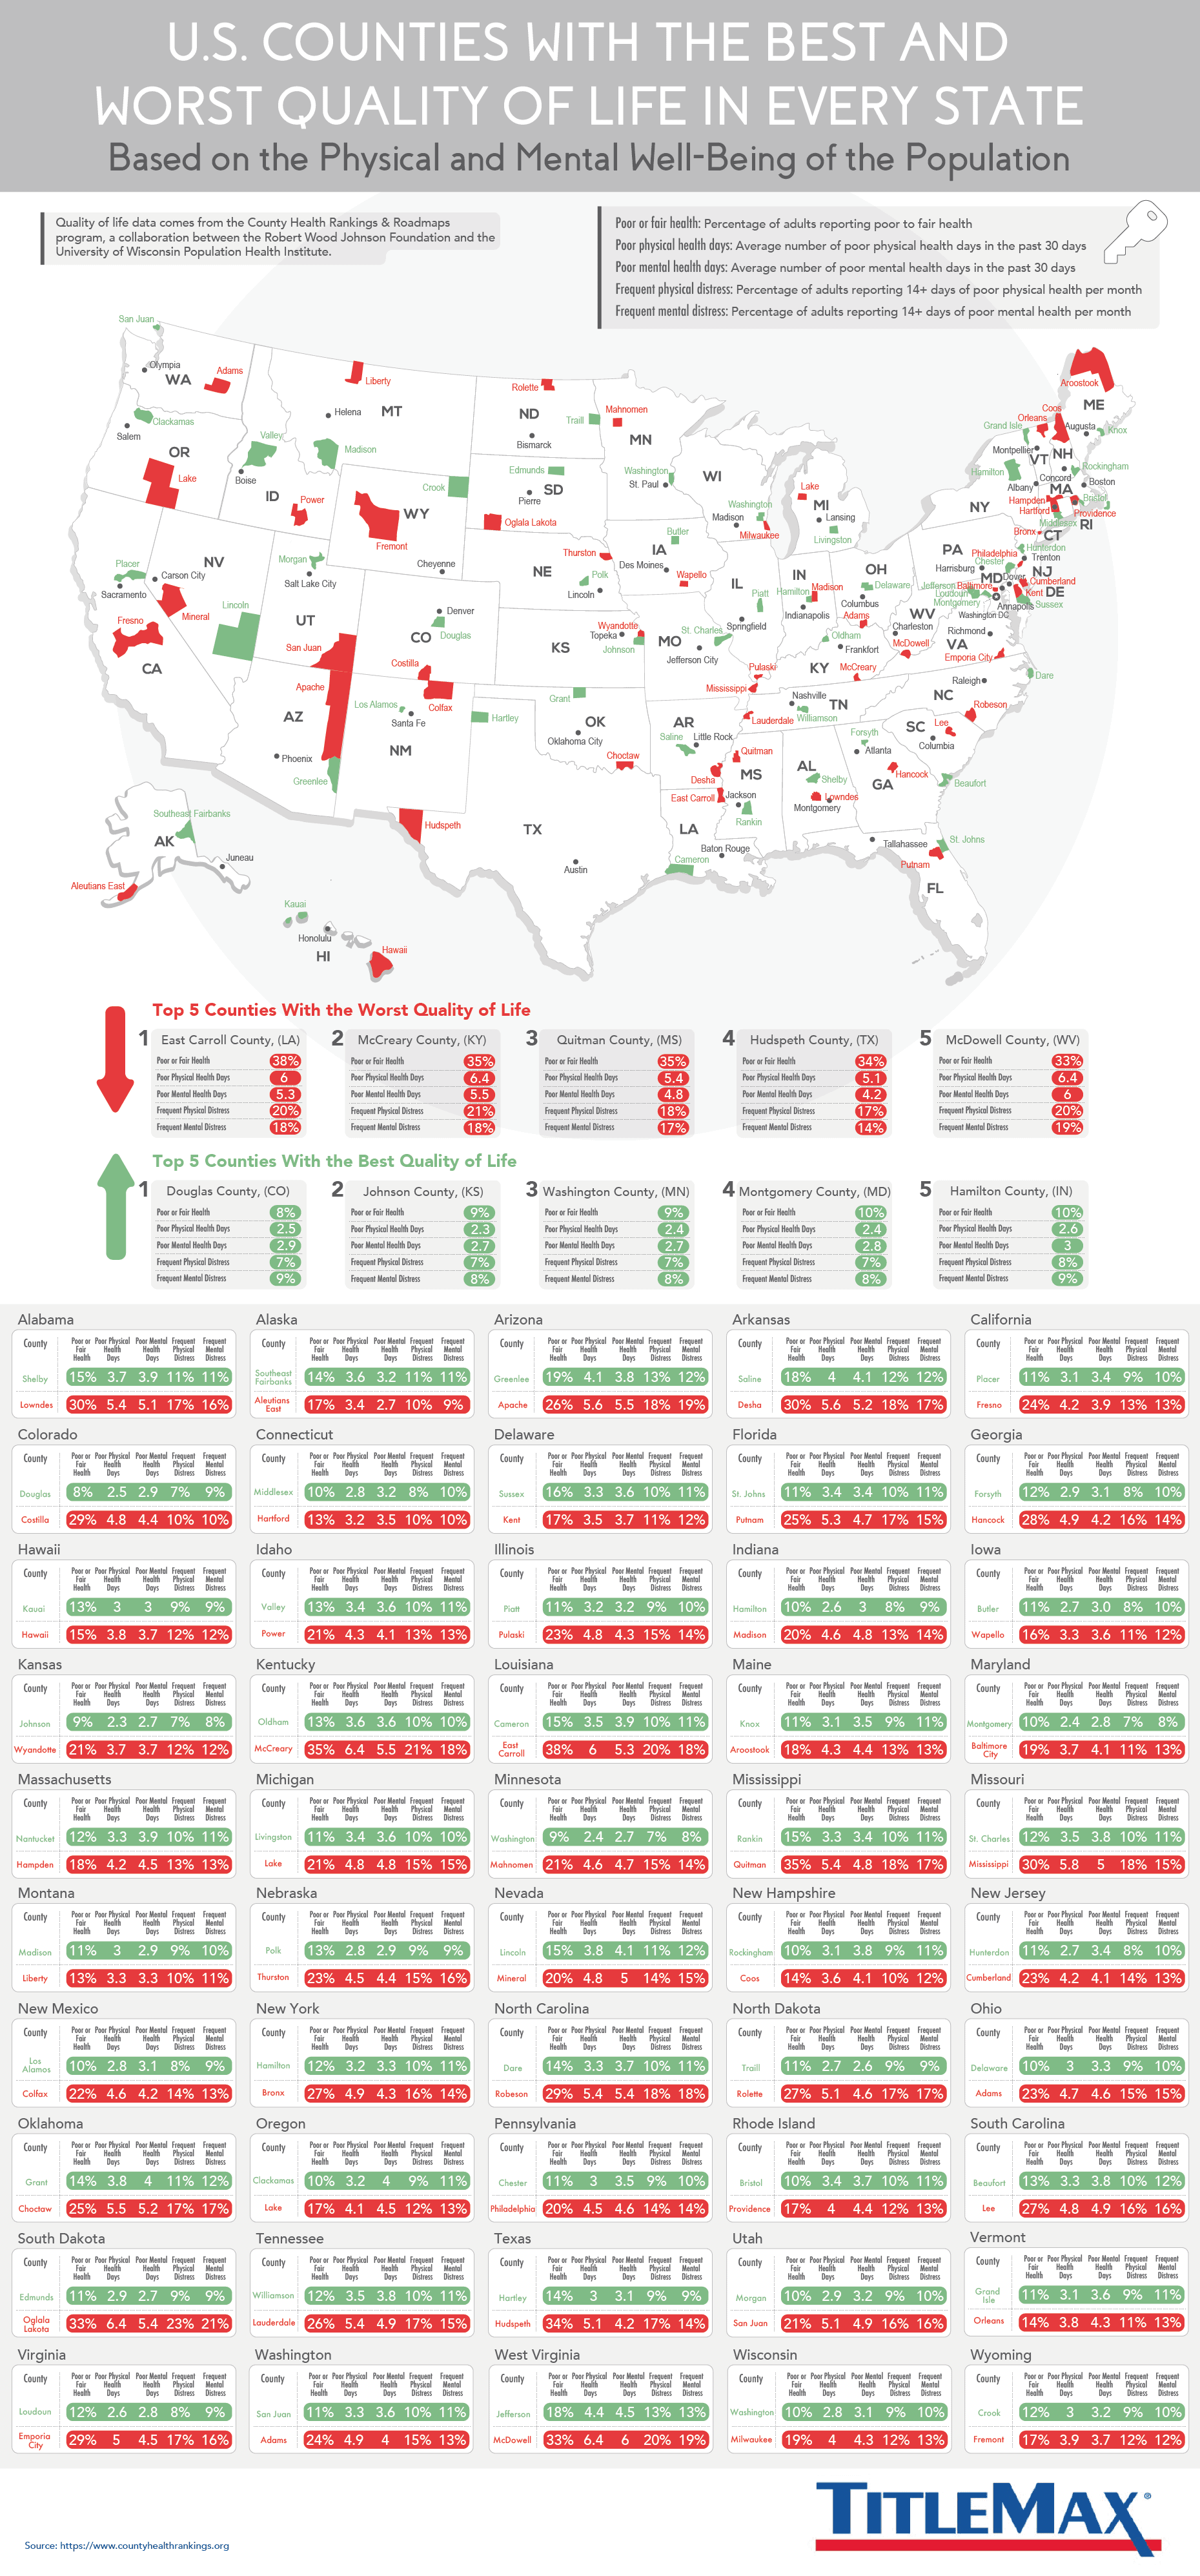 This is Where You Can Expect The Best and Worst Quality of Life in Every State